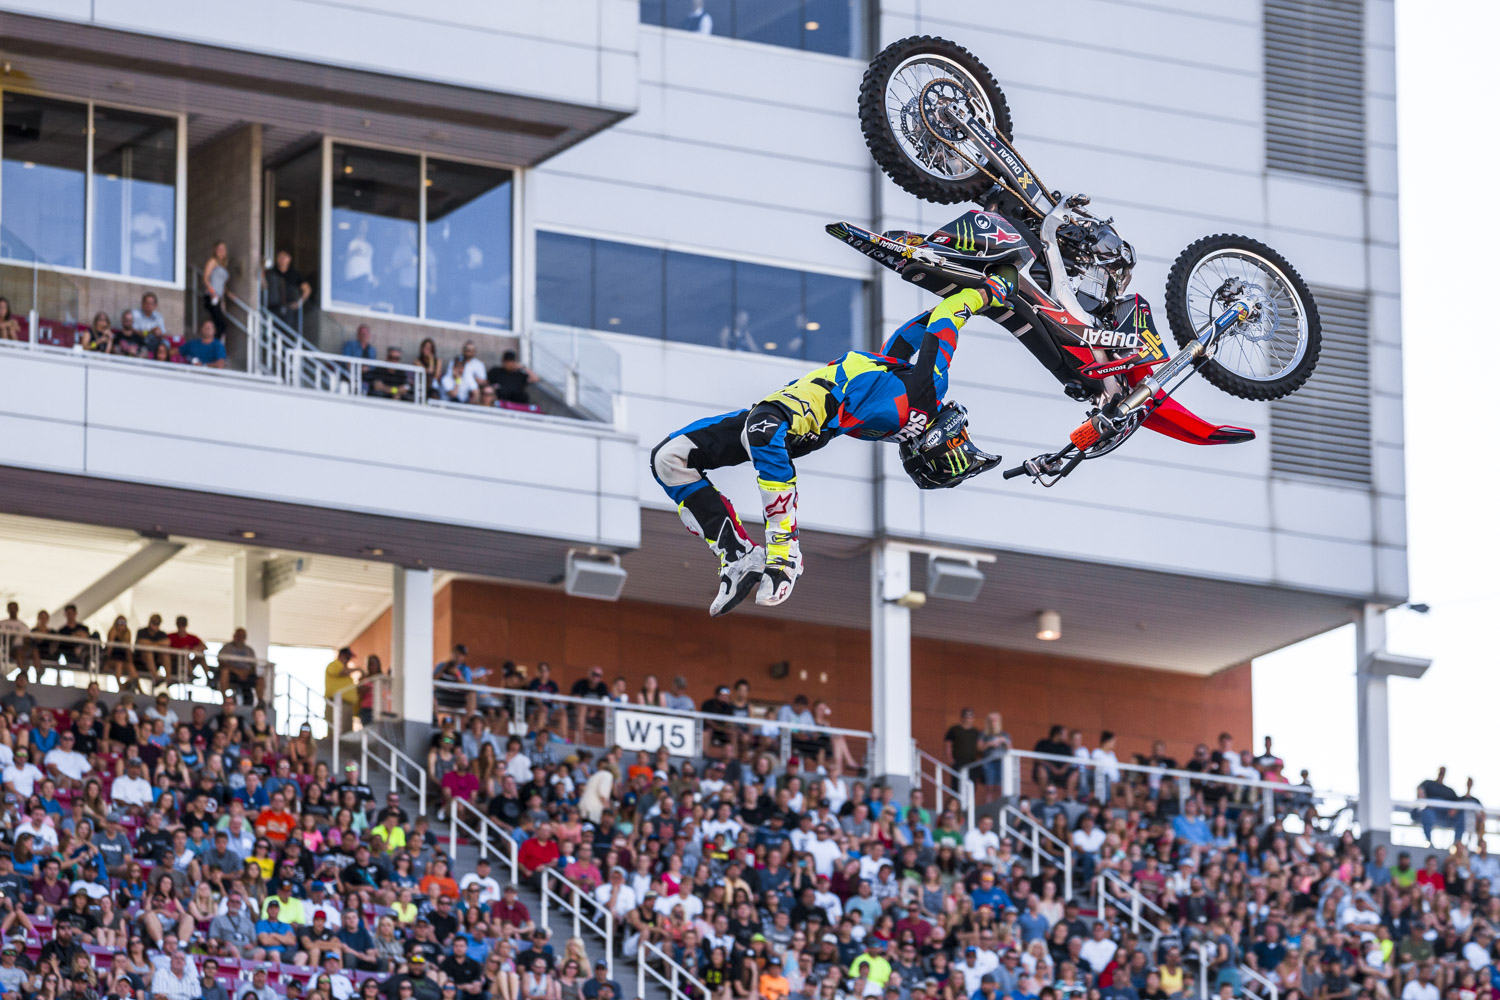 Monster Energy's Josh Sheehan to Compete at Nitro World Games in Salt Lake City